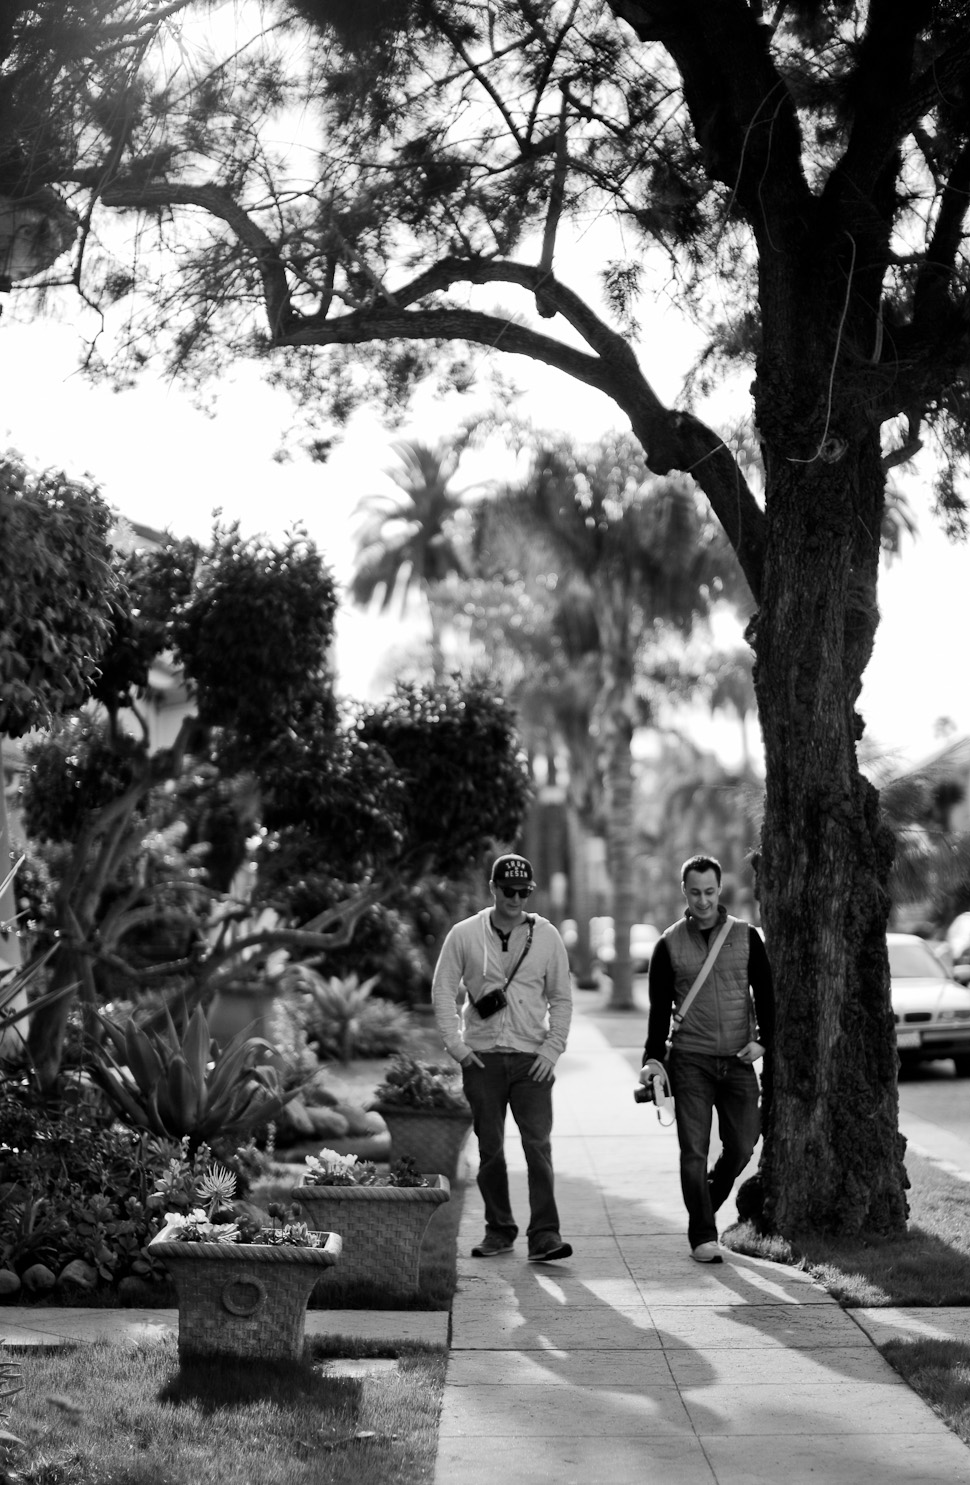 Rob and John in the sunny December weather in Santa Barbara, December 2014. Leica M240 with Leica 50mm Noctilux-M ASPH f/0.95